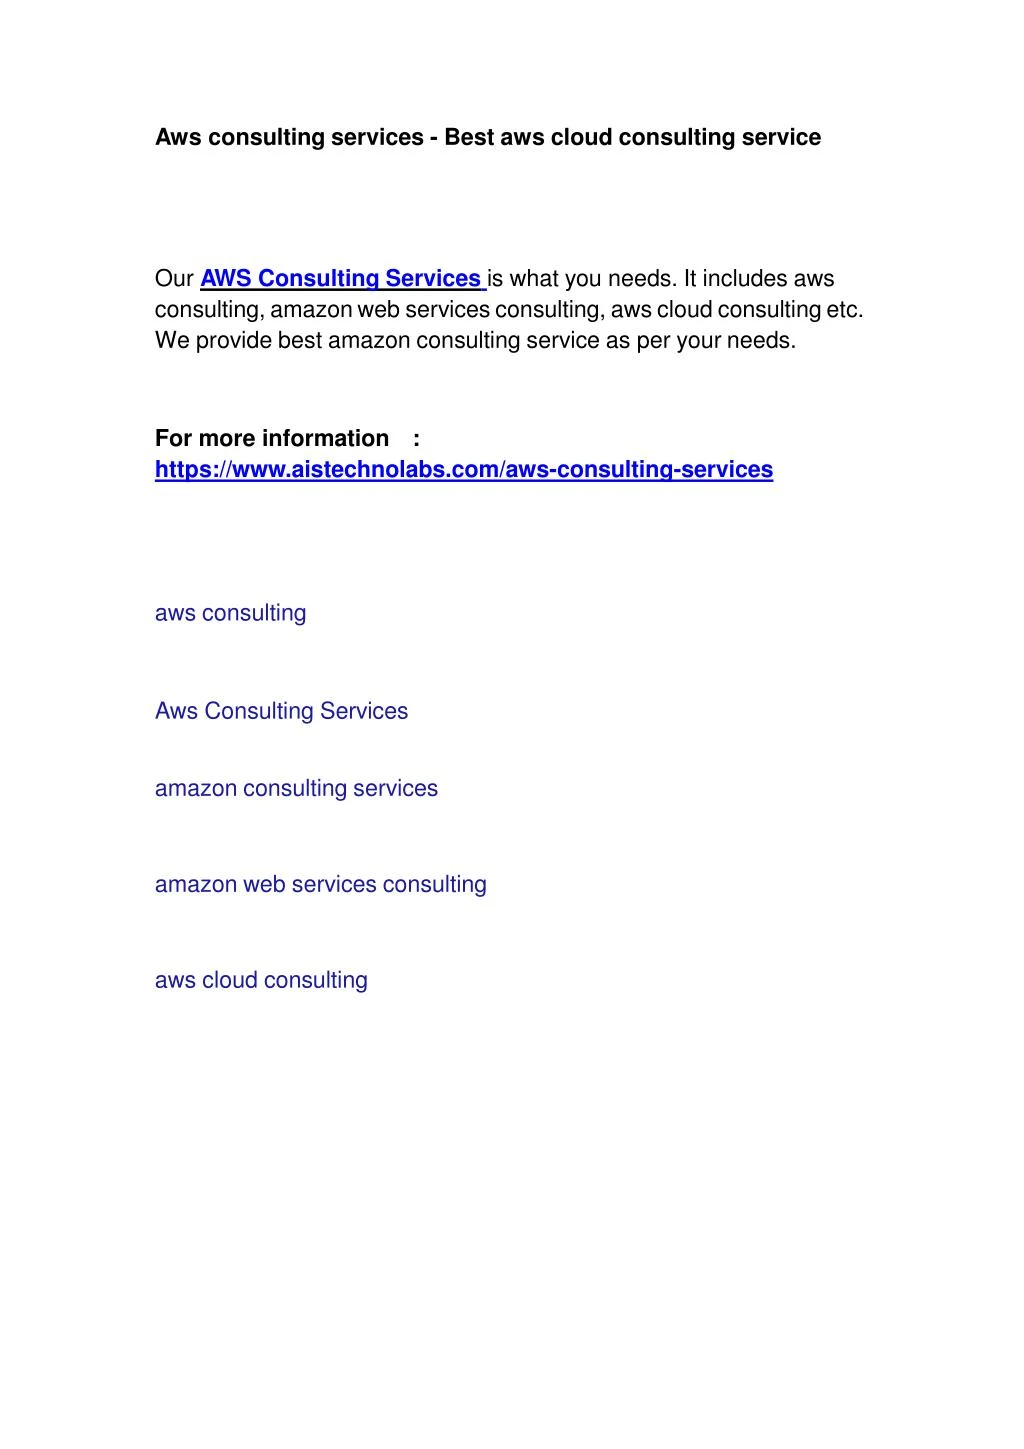 aws consulting services best aws cloud consulting